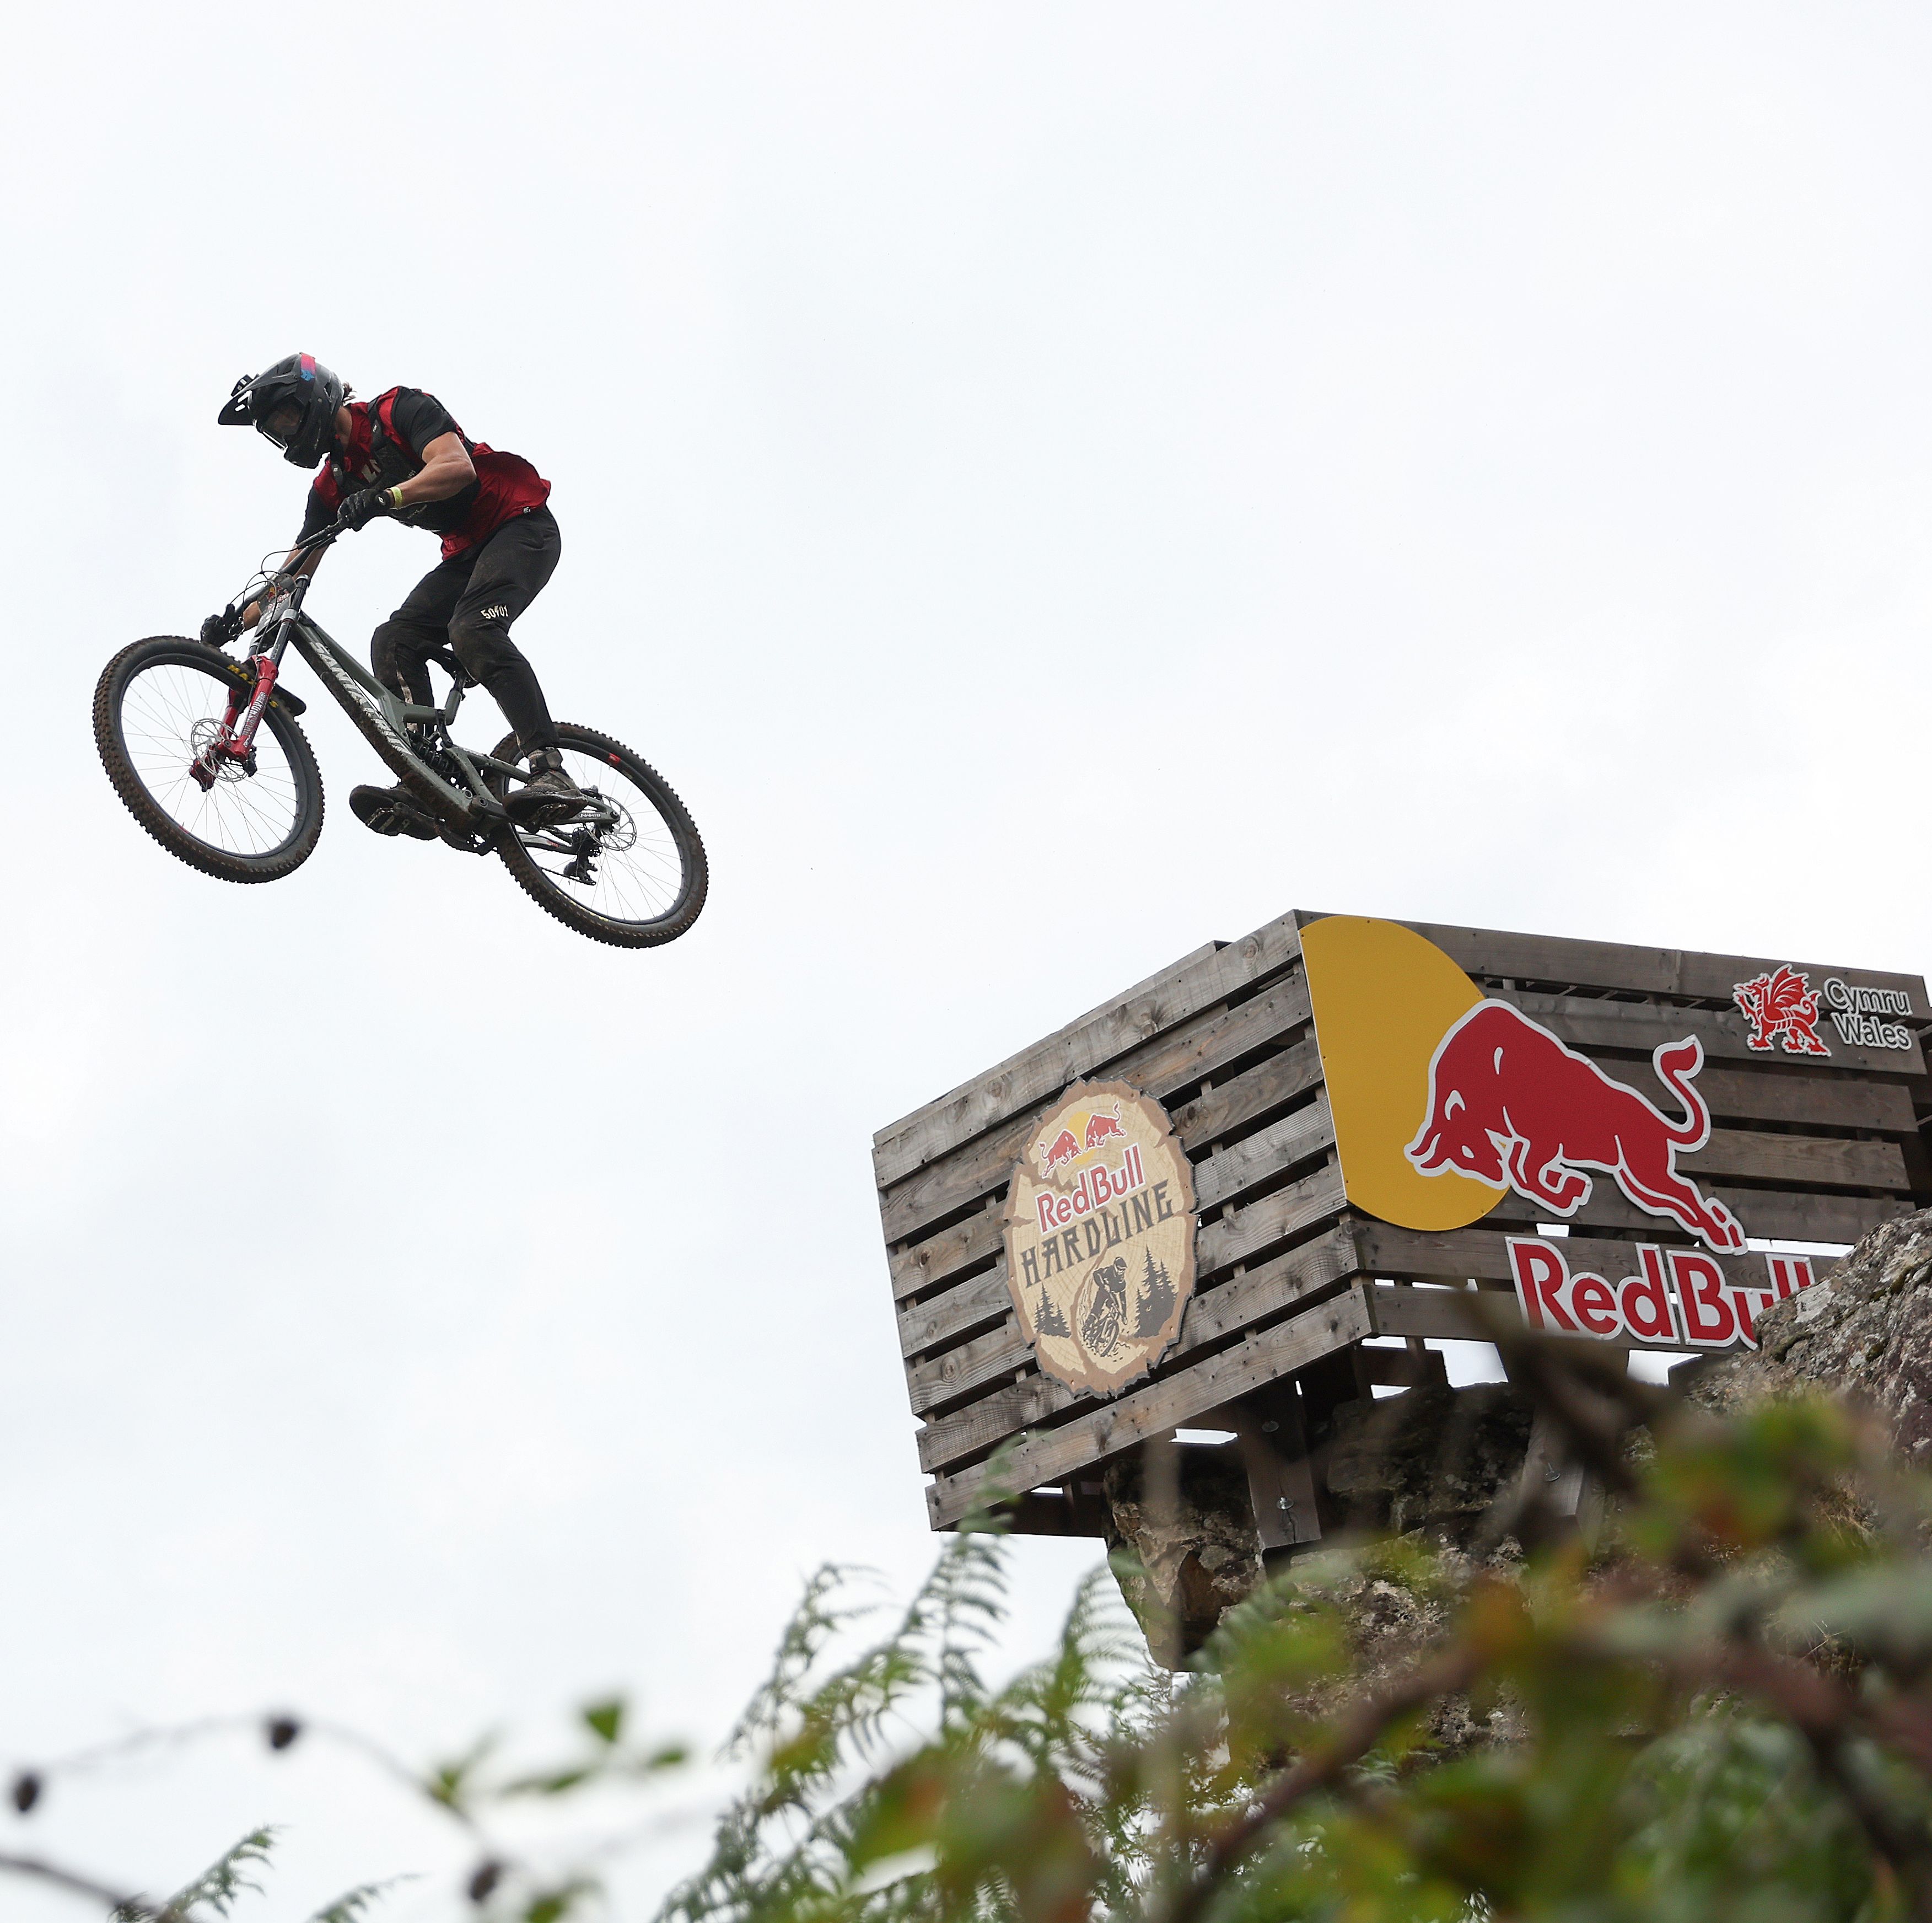 Watch This Video to See If You Can Match These Red Bull Athletes to Their Sports